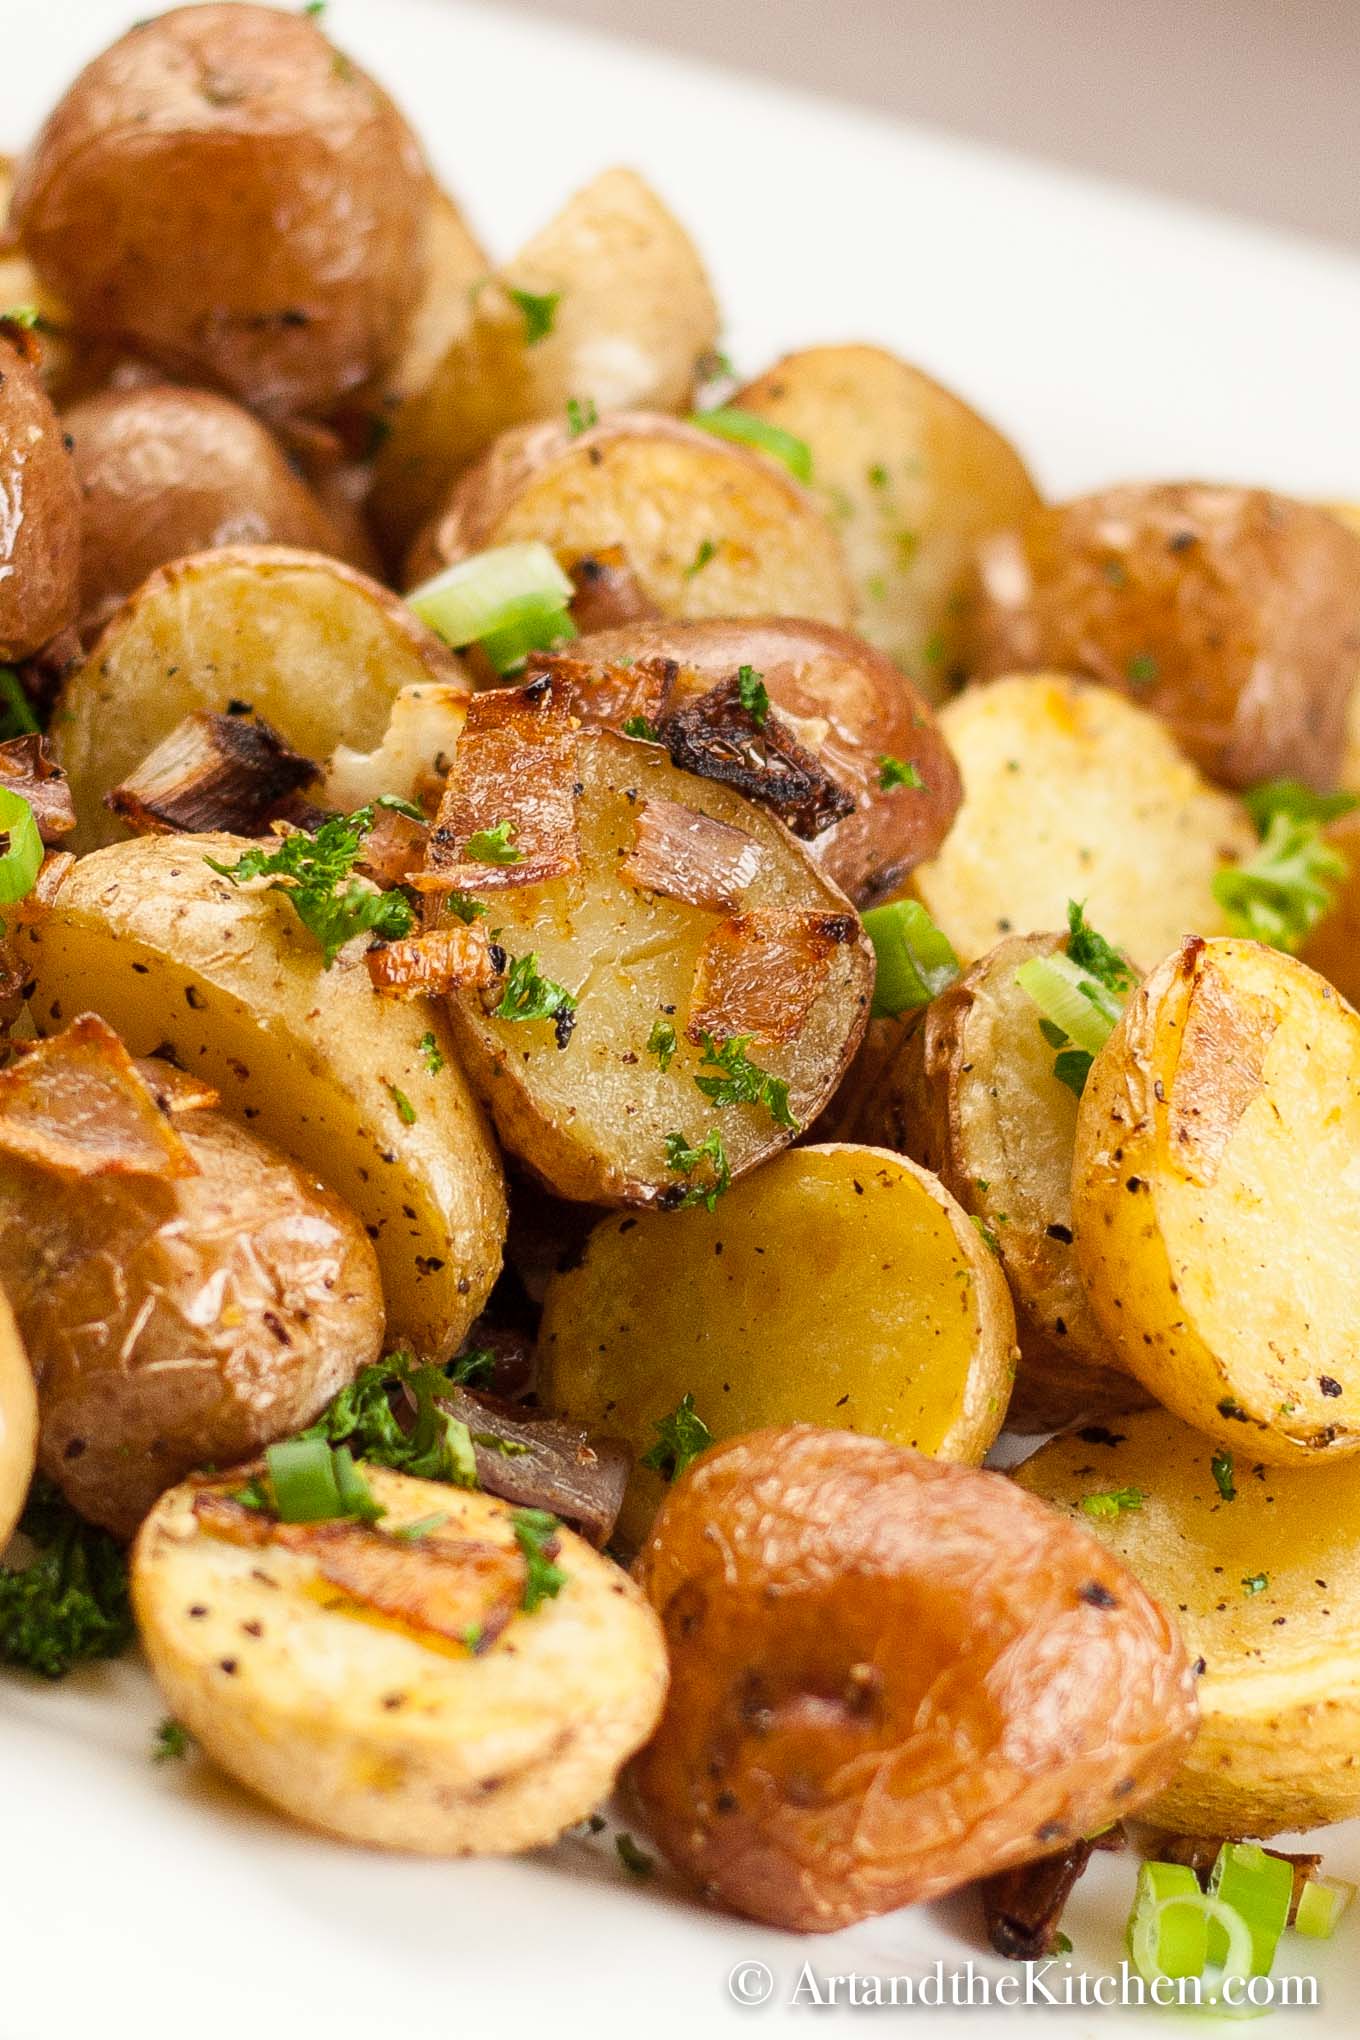 Pile of crispy roasted potatoes with onions.